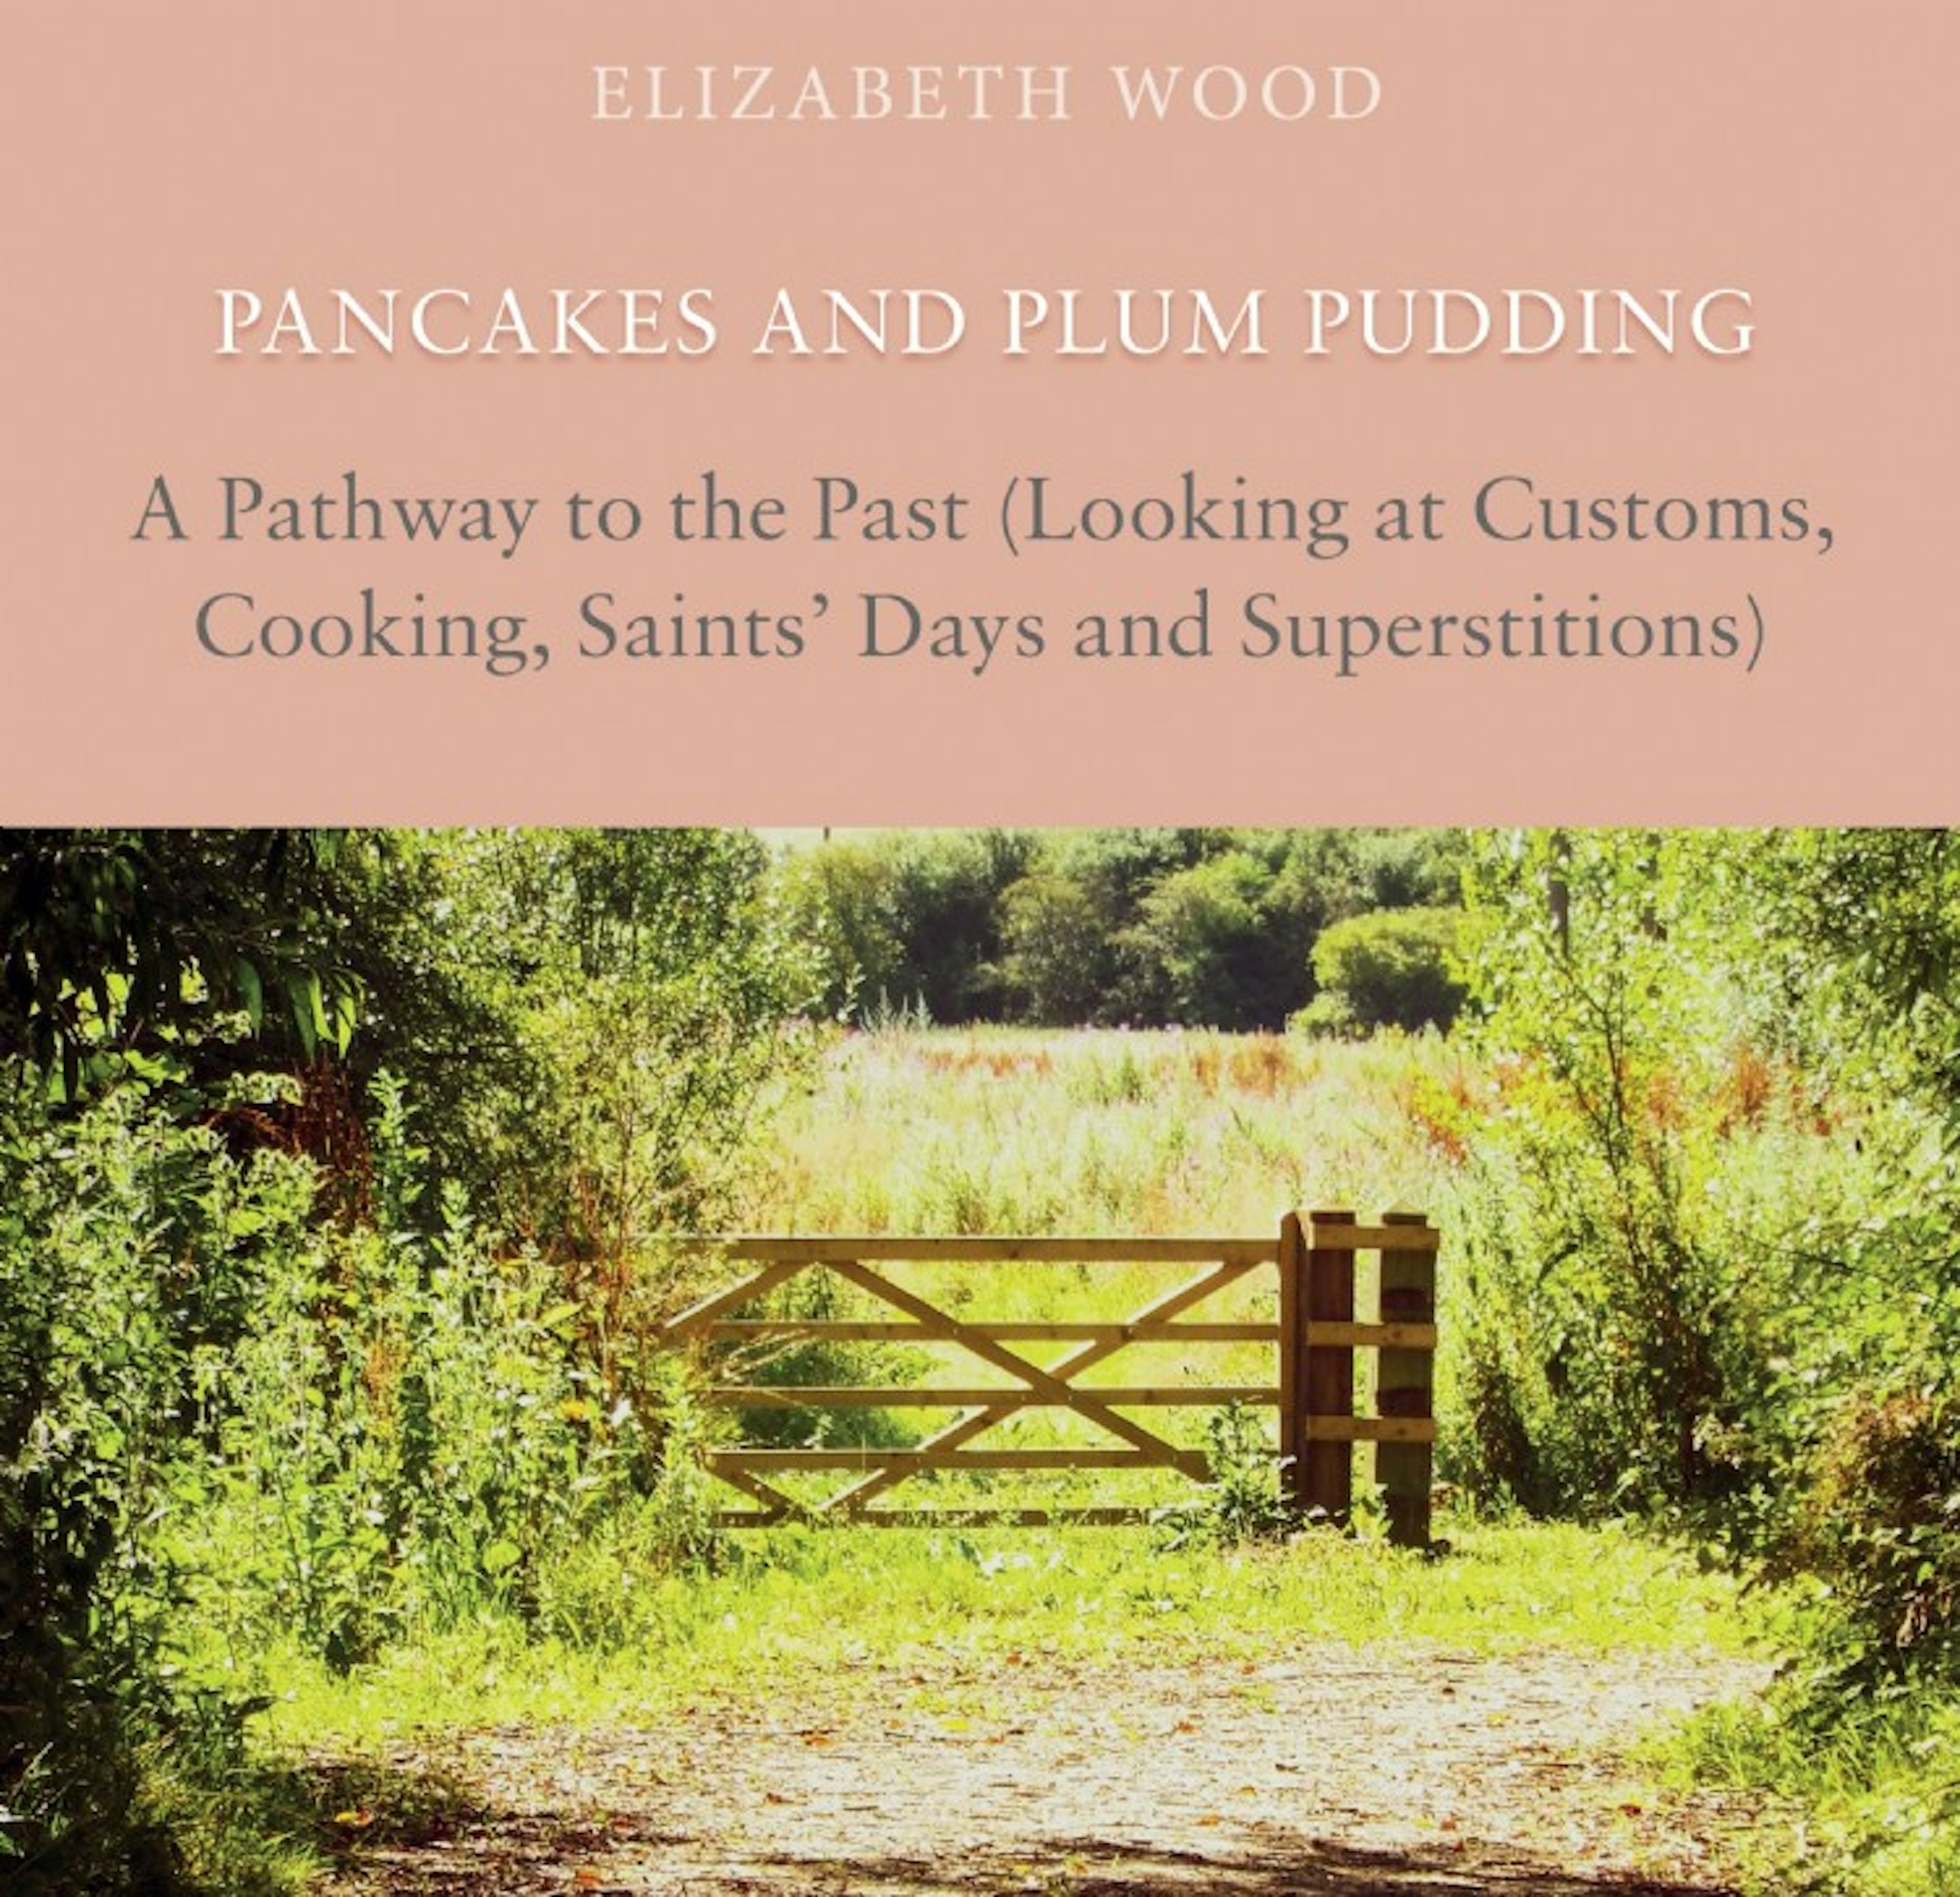 Pancakes and Plum Pudding